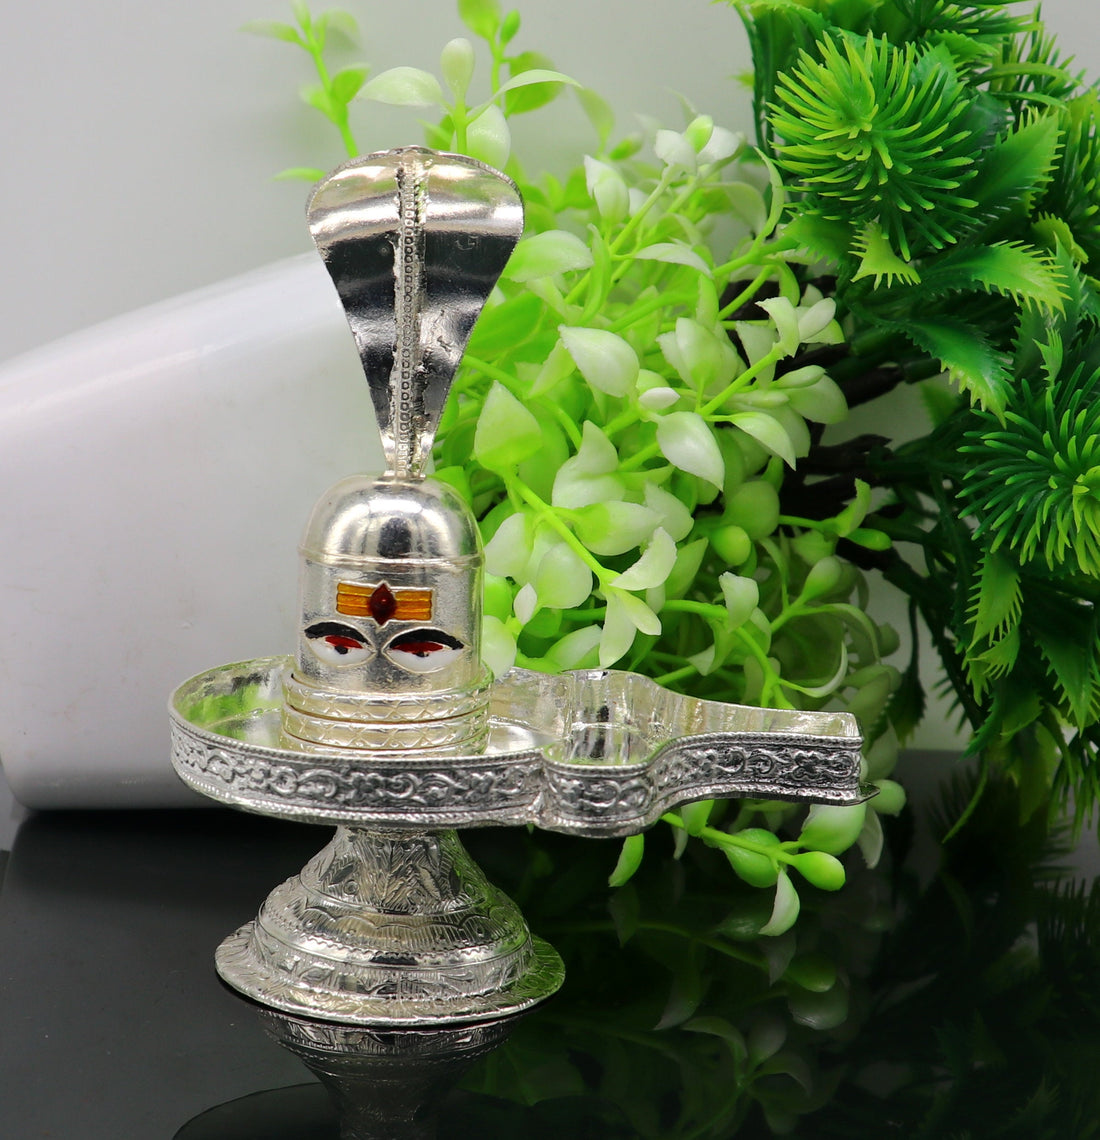 4" 925 sterling silver handcrafted Lord shiva-Linga Stand, silver utensil, silver puja temple art, shiva lingam stand with serpent su162 - TRIBAL ORNAMENTS